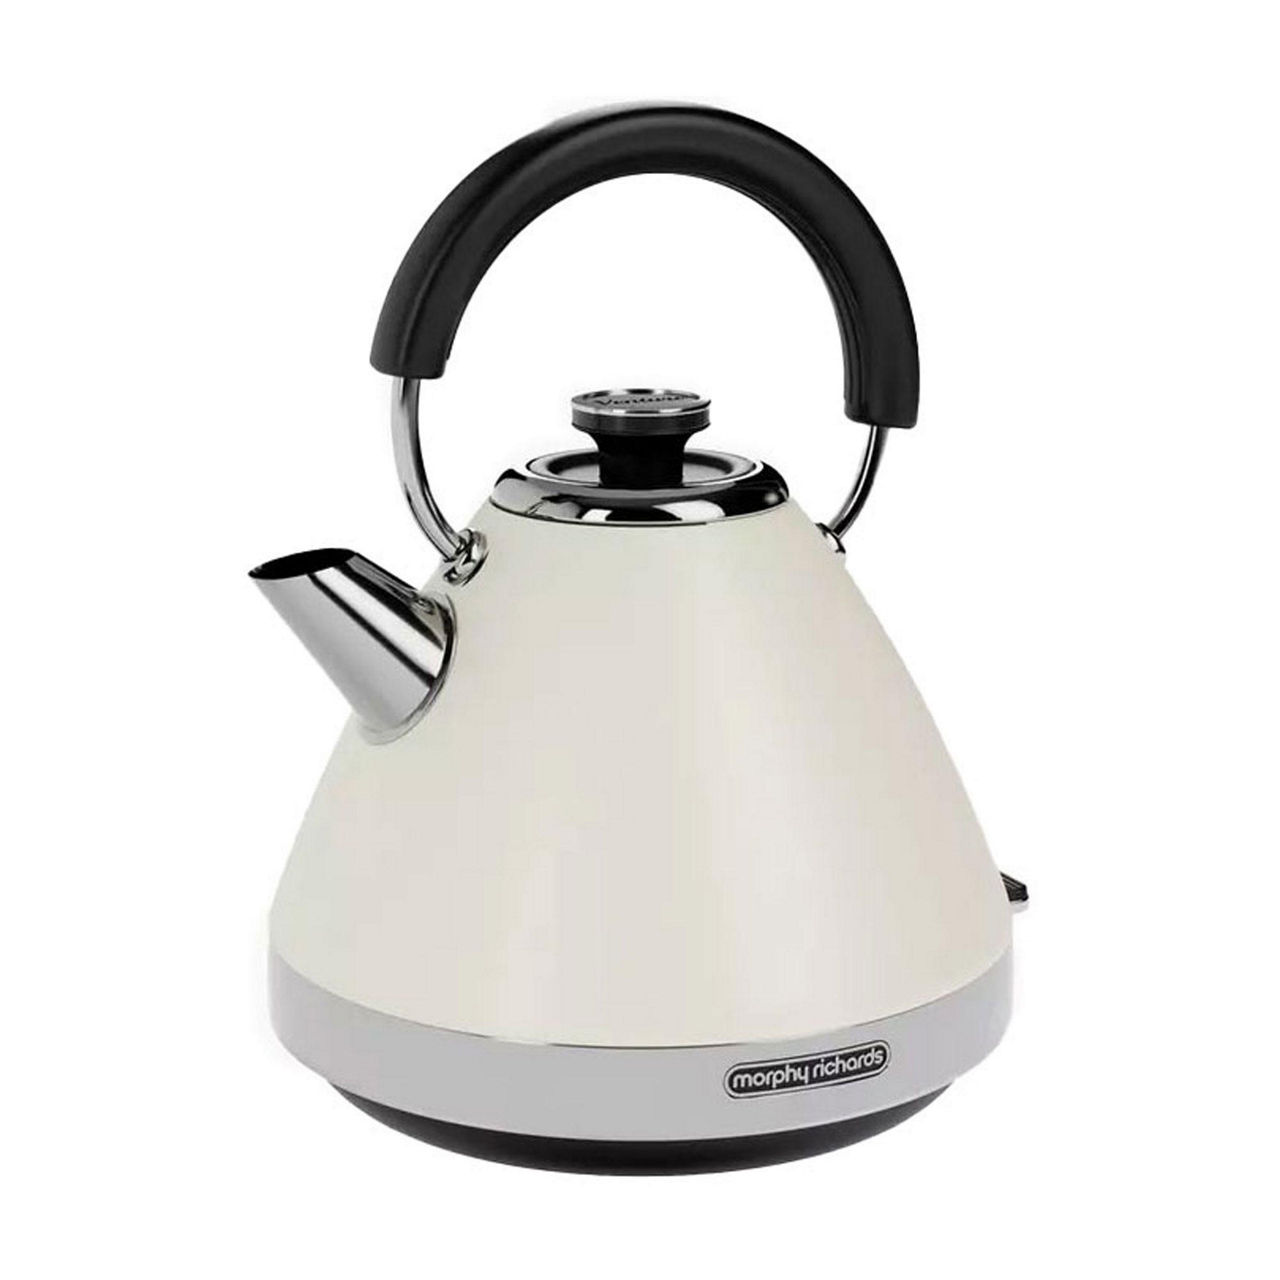 Morphy Richards Hive Kettle review